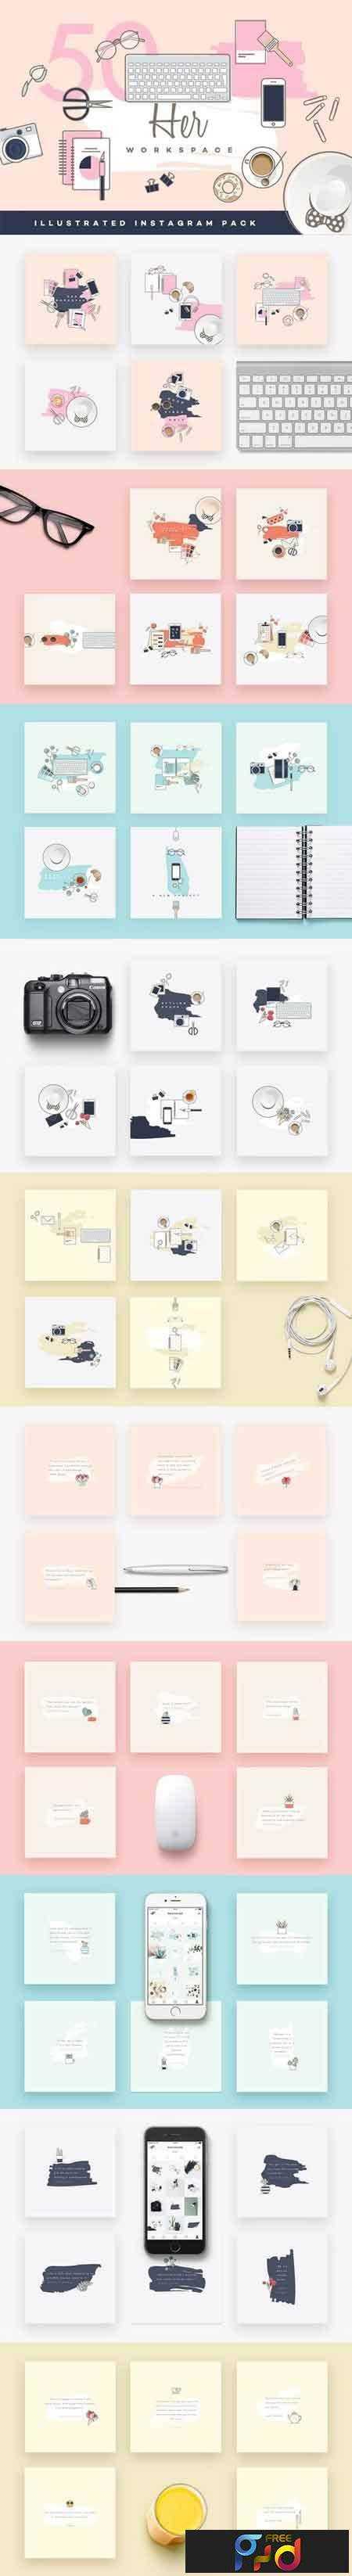 1801017 Her Workspace illustrated Insta pack 1780223 1